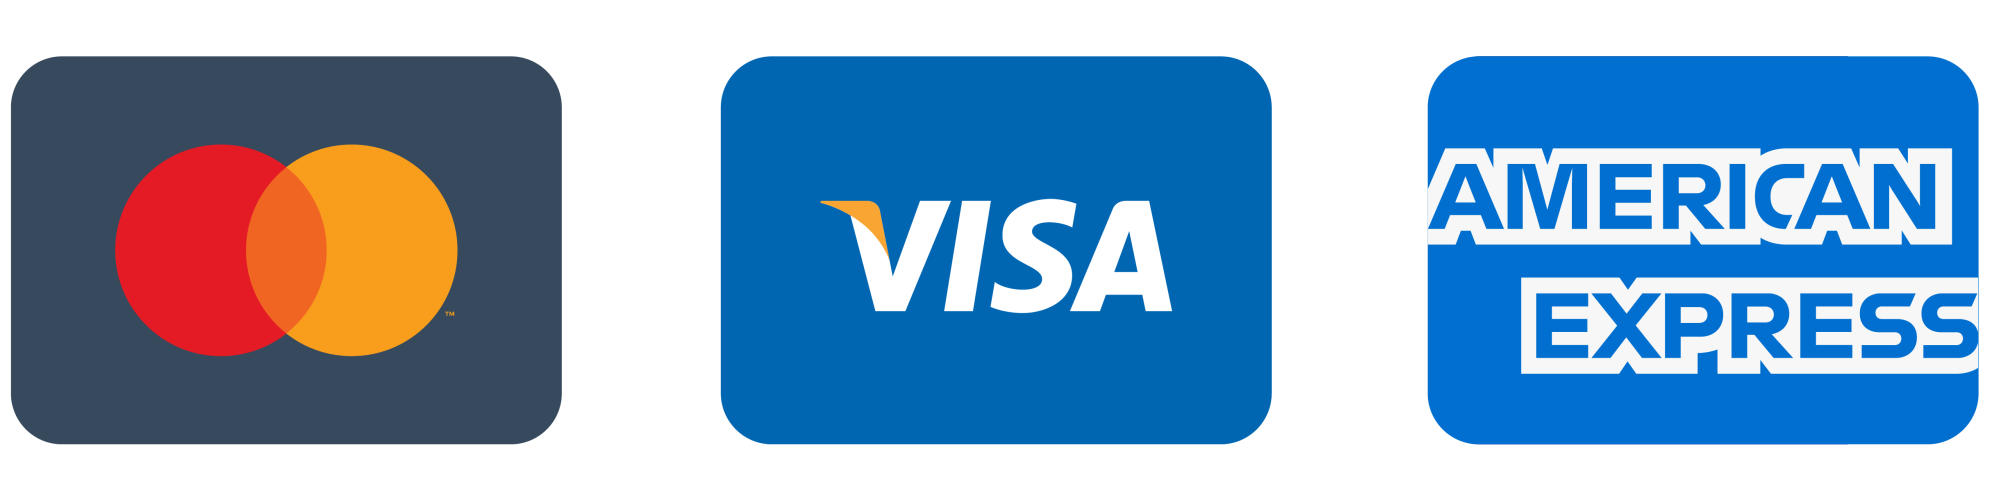 We accept all major debit and credit cards including Maestro, Visa, MasterCard and American Express.